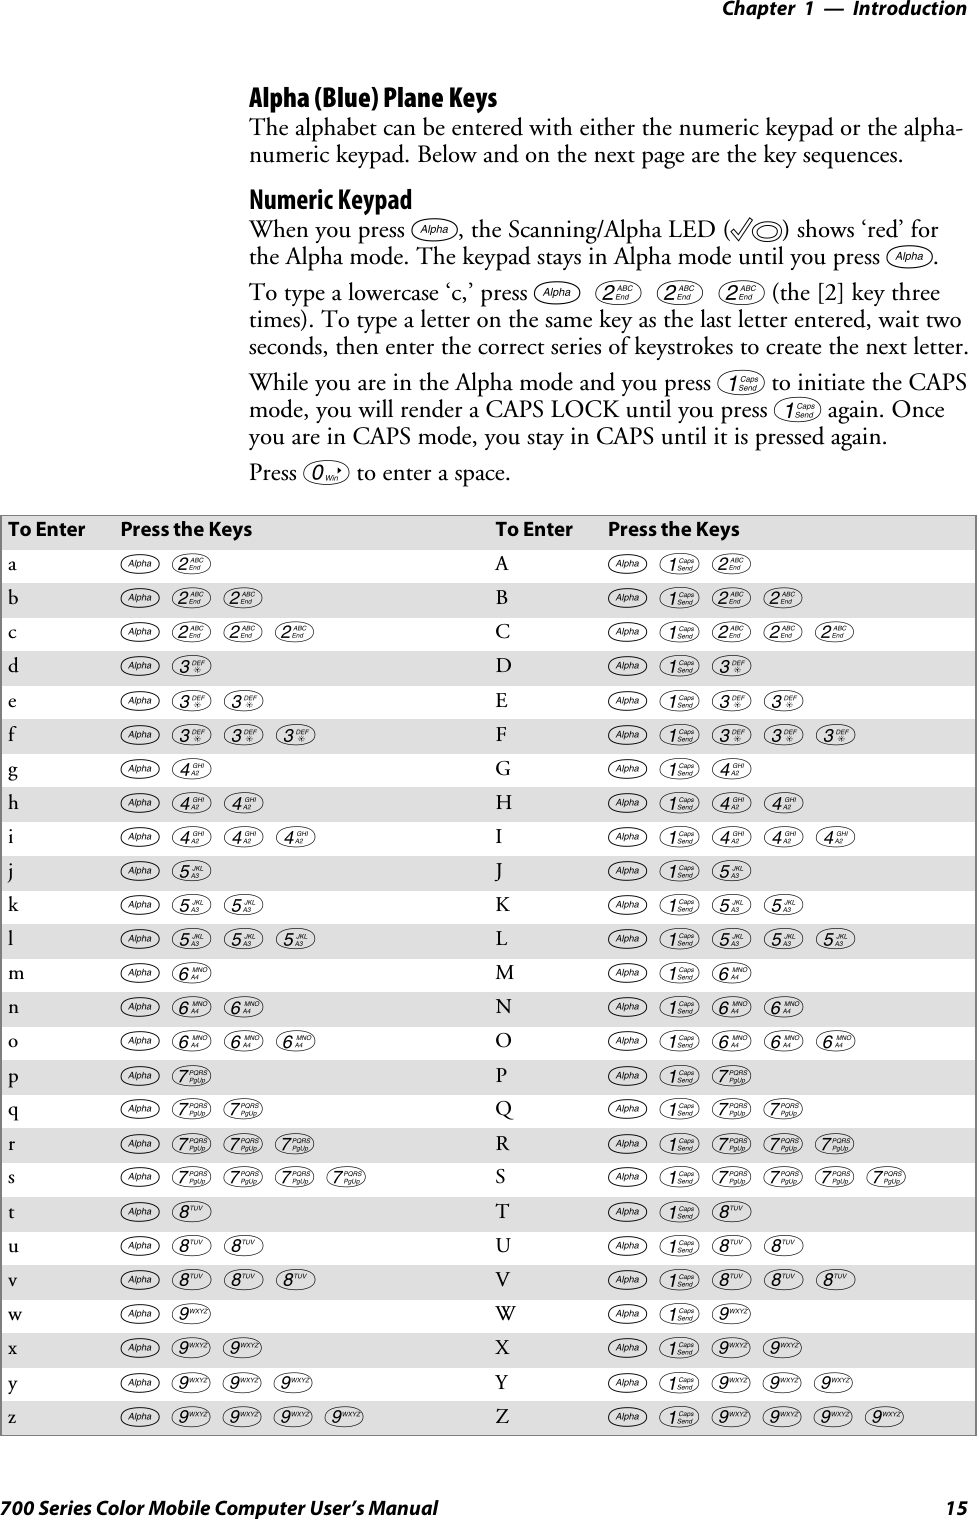 Introduction—Chapter 115700 Series Color Mobile Computer User’s ManualAlpha (Blue) Plane KeysThe alphabet can be entered with either the numeric keypad or the alpha-numeric keypad. Below and on the next page are the key sequences.Numeric KeypadWhen you press F, the Scanning/Alpha LED (C)shows‘red’forthe Alpha mode. The keypad stays in Alpha mode until you press F.To type a lowercase ‘c,’ press F222(the [2] key threetimes). To type a letter on the same key as the last letter entered, wait twoseconds, then enter the correct series of keystrokes to create the next letter.WhileyouareintheAlphamodeandyoupress1to initiate the CAPSmode, you will render a CAPS LOCK until you press 1again. Onceyou are in CAPS mode, you stay in CAPS until it is pressed again.Press 0to enter a space.To Enter Press the Keys To Enter Press the KeysaF2 AF12bF22 BF122cF222 CF1222dF3 DF13eF33 EF133fF333 FF1333gF4 GF14hF44 HF144iF444 IF1444jF5 JF15kF55 KF155lF555 LF1555mF6 MF16nF66 NF166oF666 OF1666pF7 PF17qF77 QF177rF777 RF1777sF7777 SF17777tF8 TF18uF88 UF188vF888 VF1888wF9 WF19xF99 XF199yF999 YF1999zF9999 ZF19999